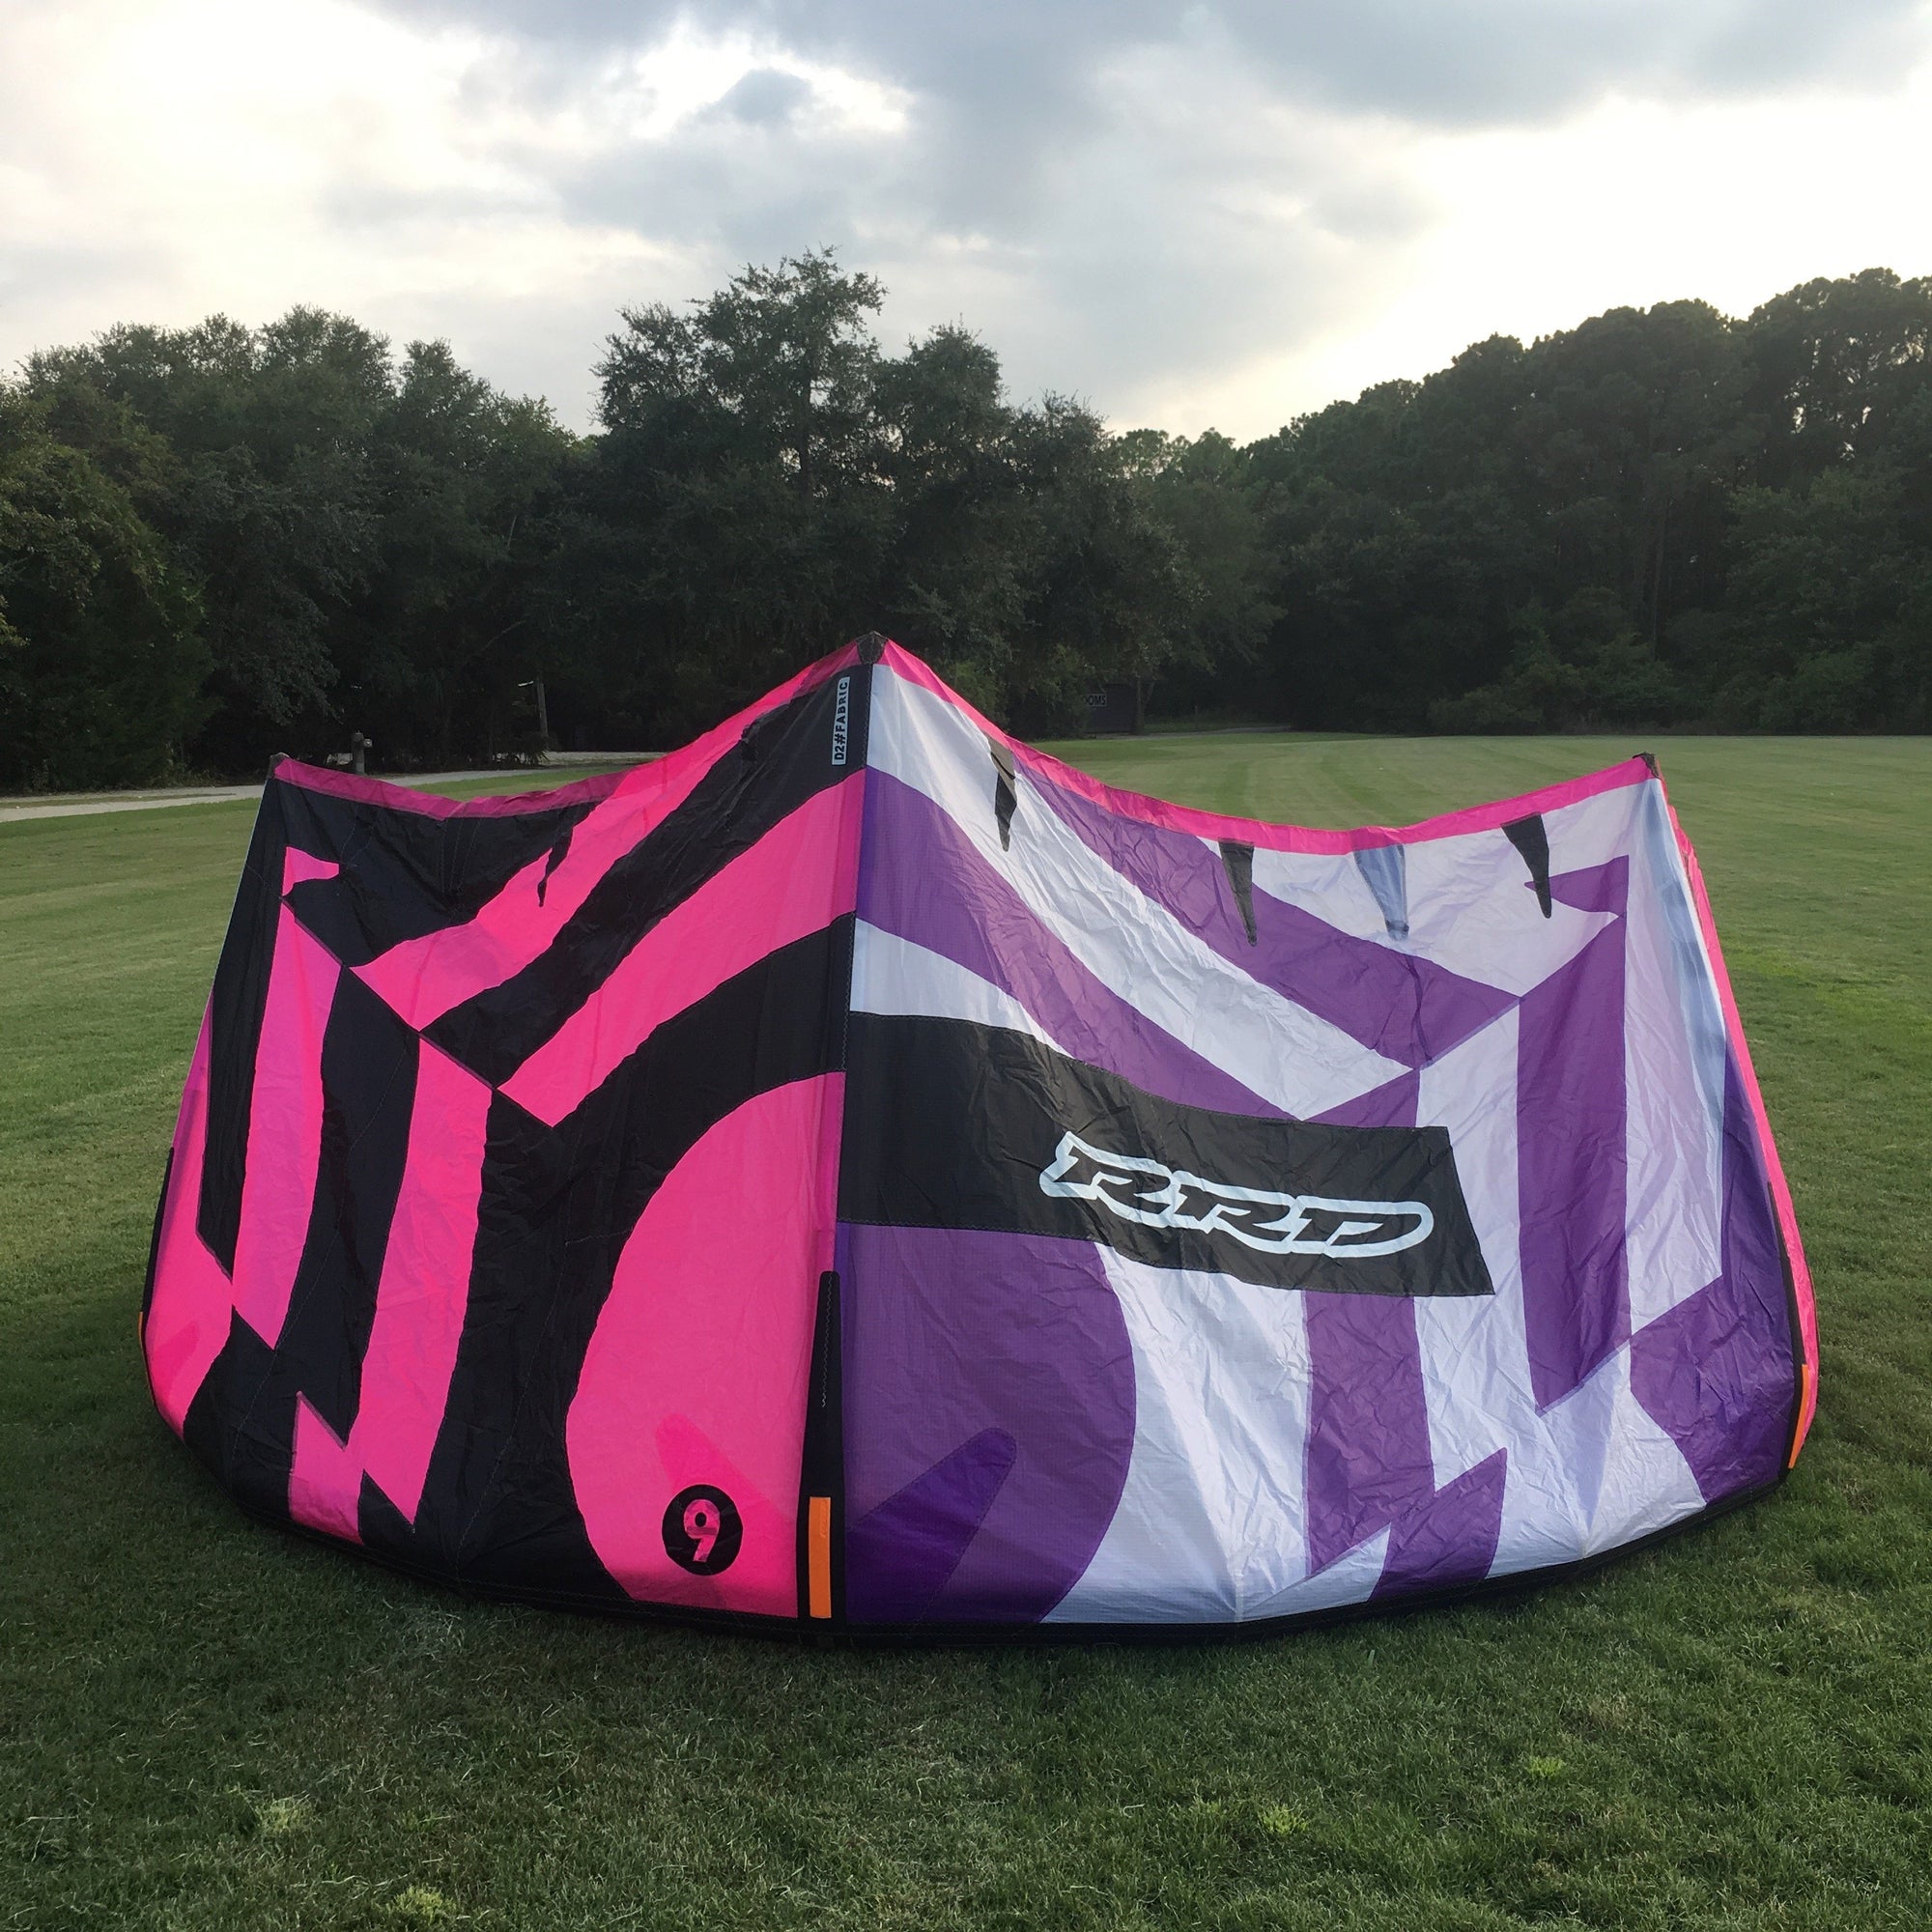 Used RRD Obession MK10 9.0 Kiteboarding Kite, 2018, Front